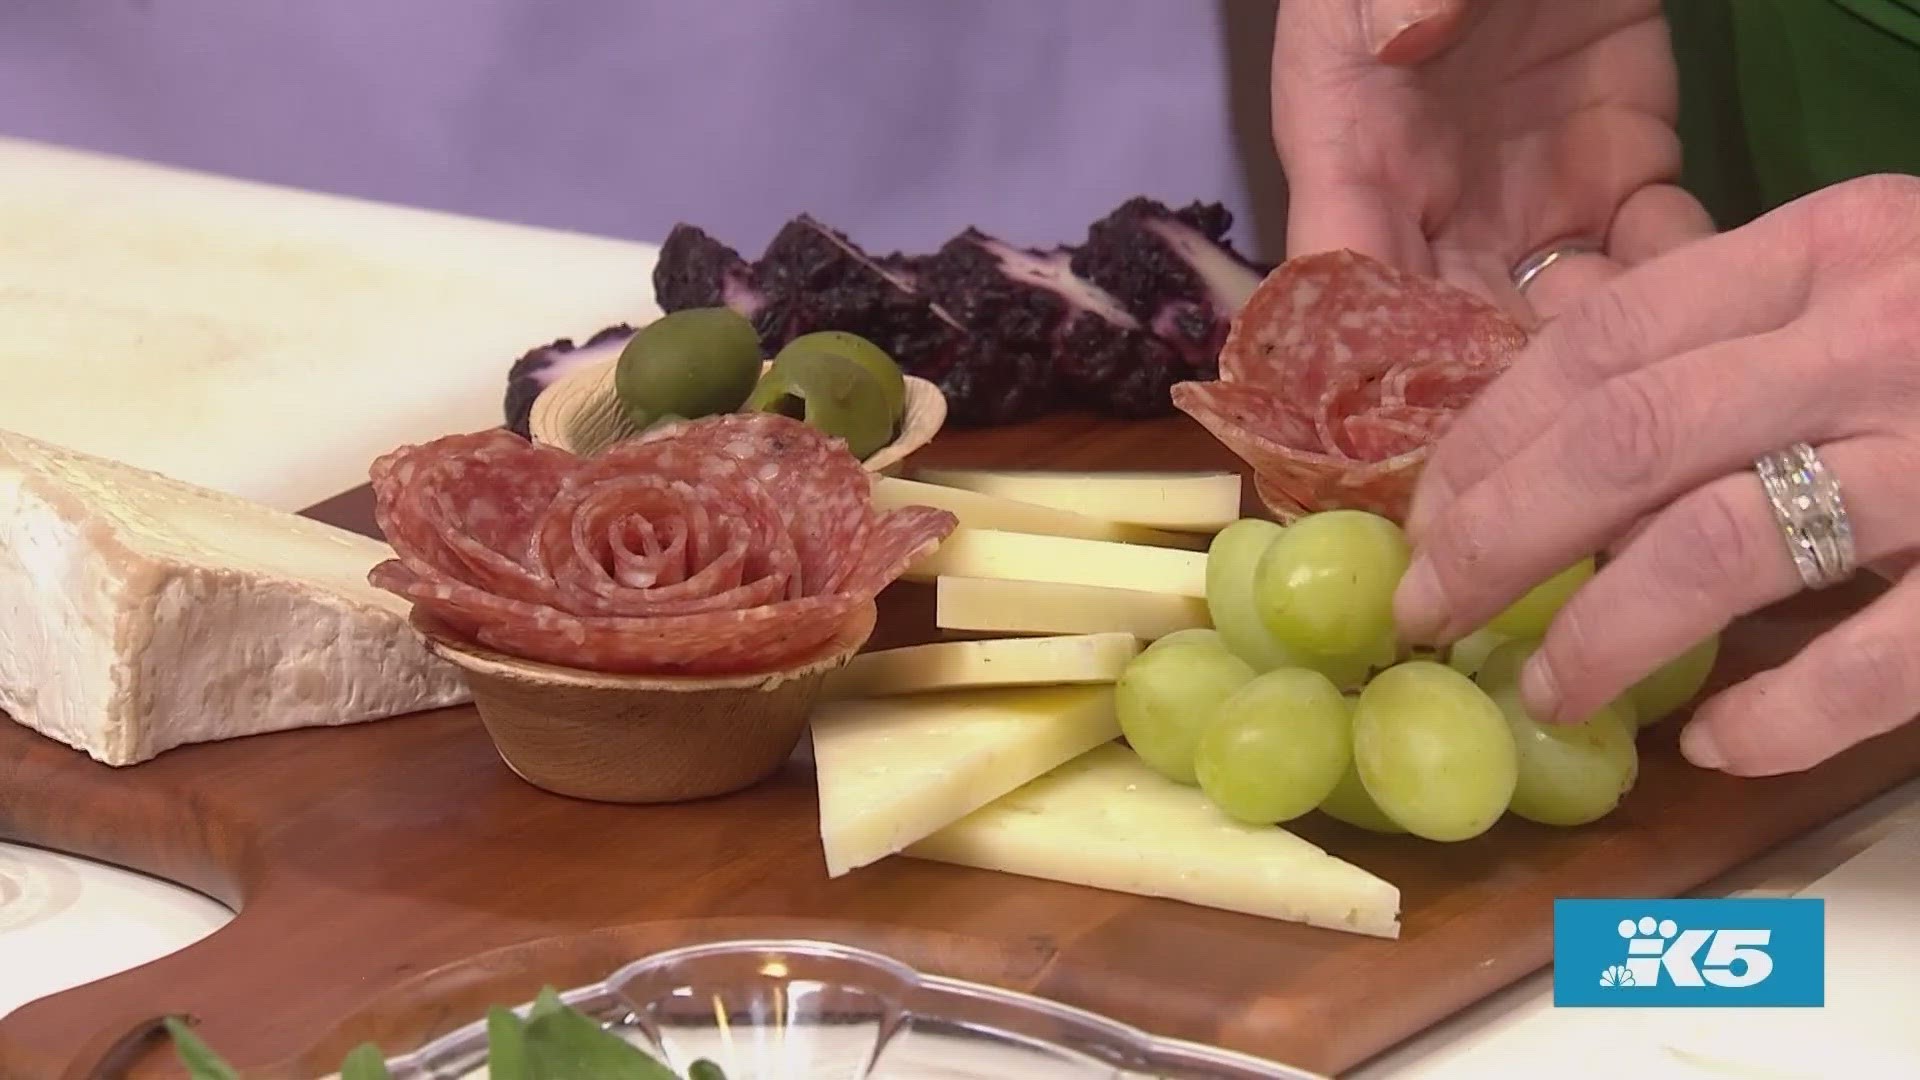 Rachel from DishedByRachel brings together charcuterie and friendships with her workshops